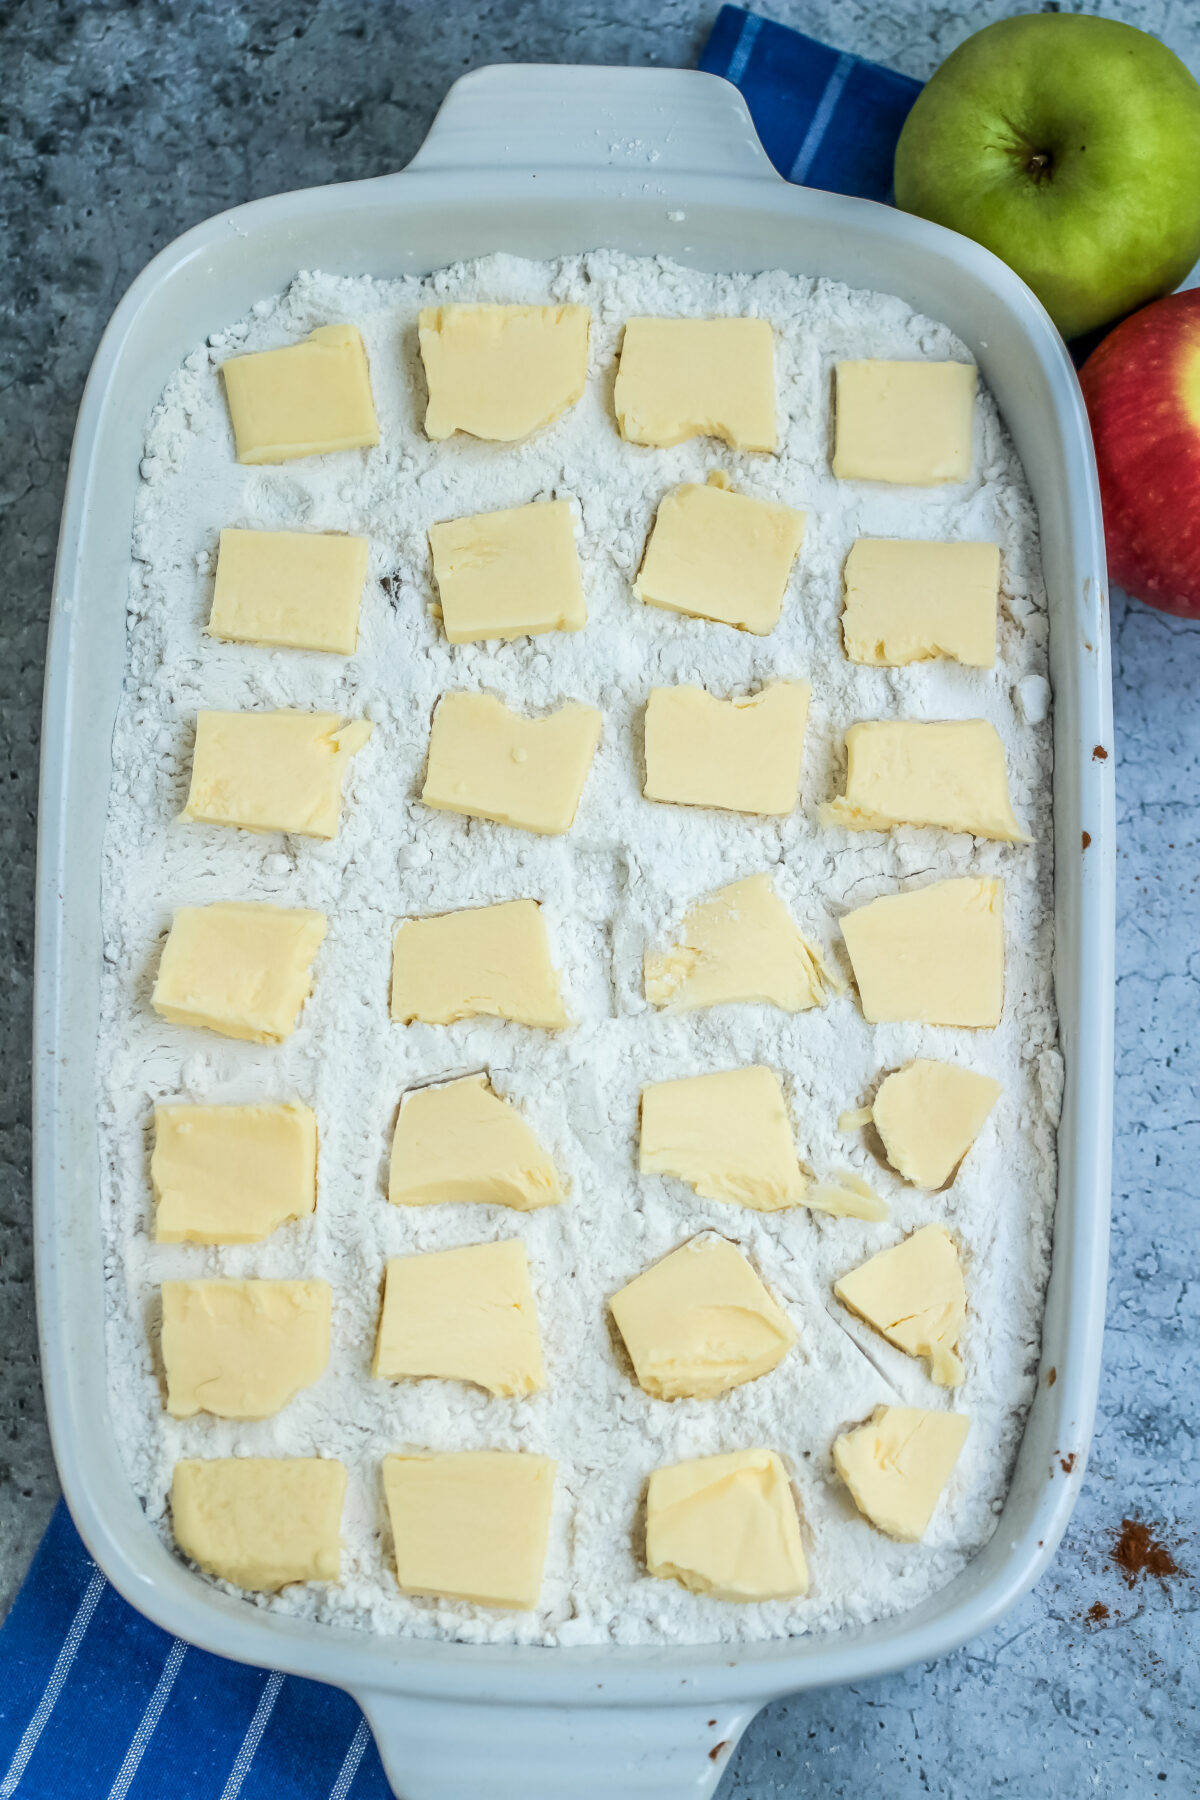 Squares of butter spread across the baking dish on top of the cake mix,.